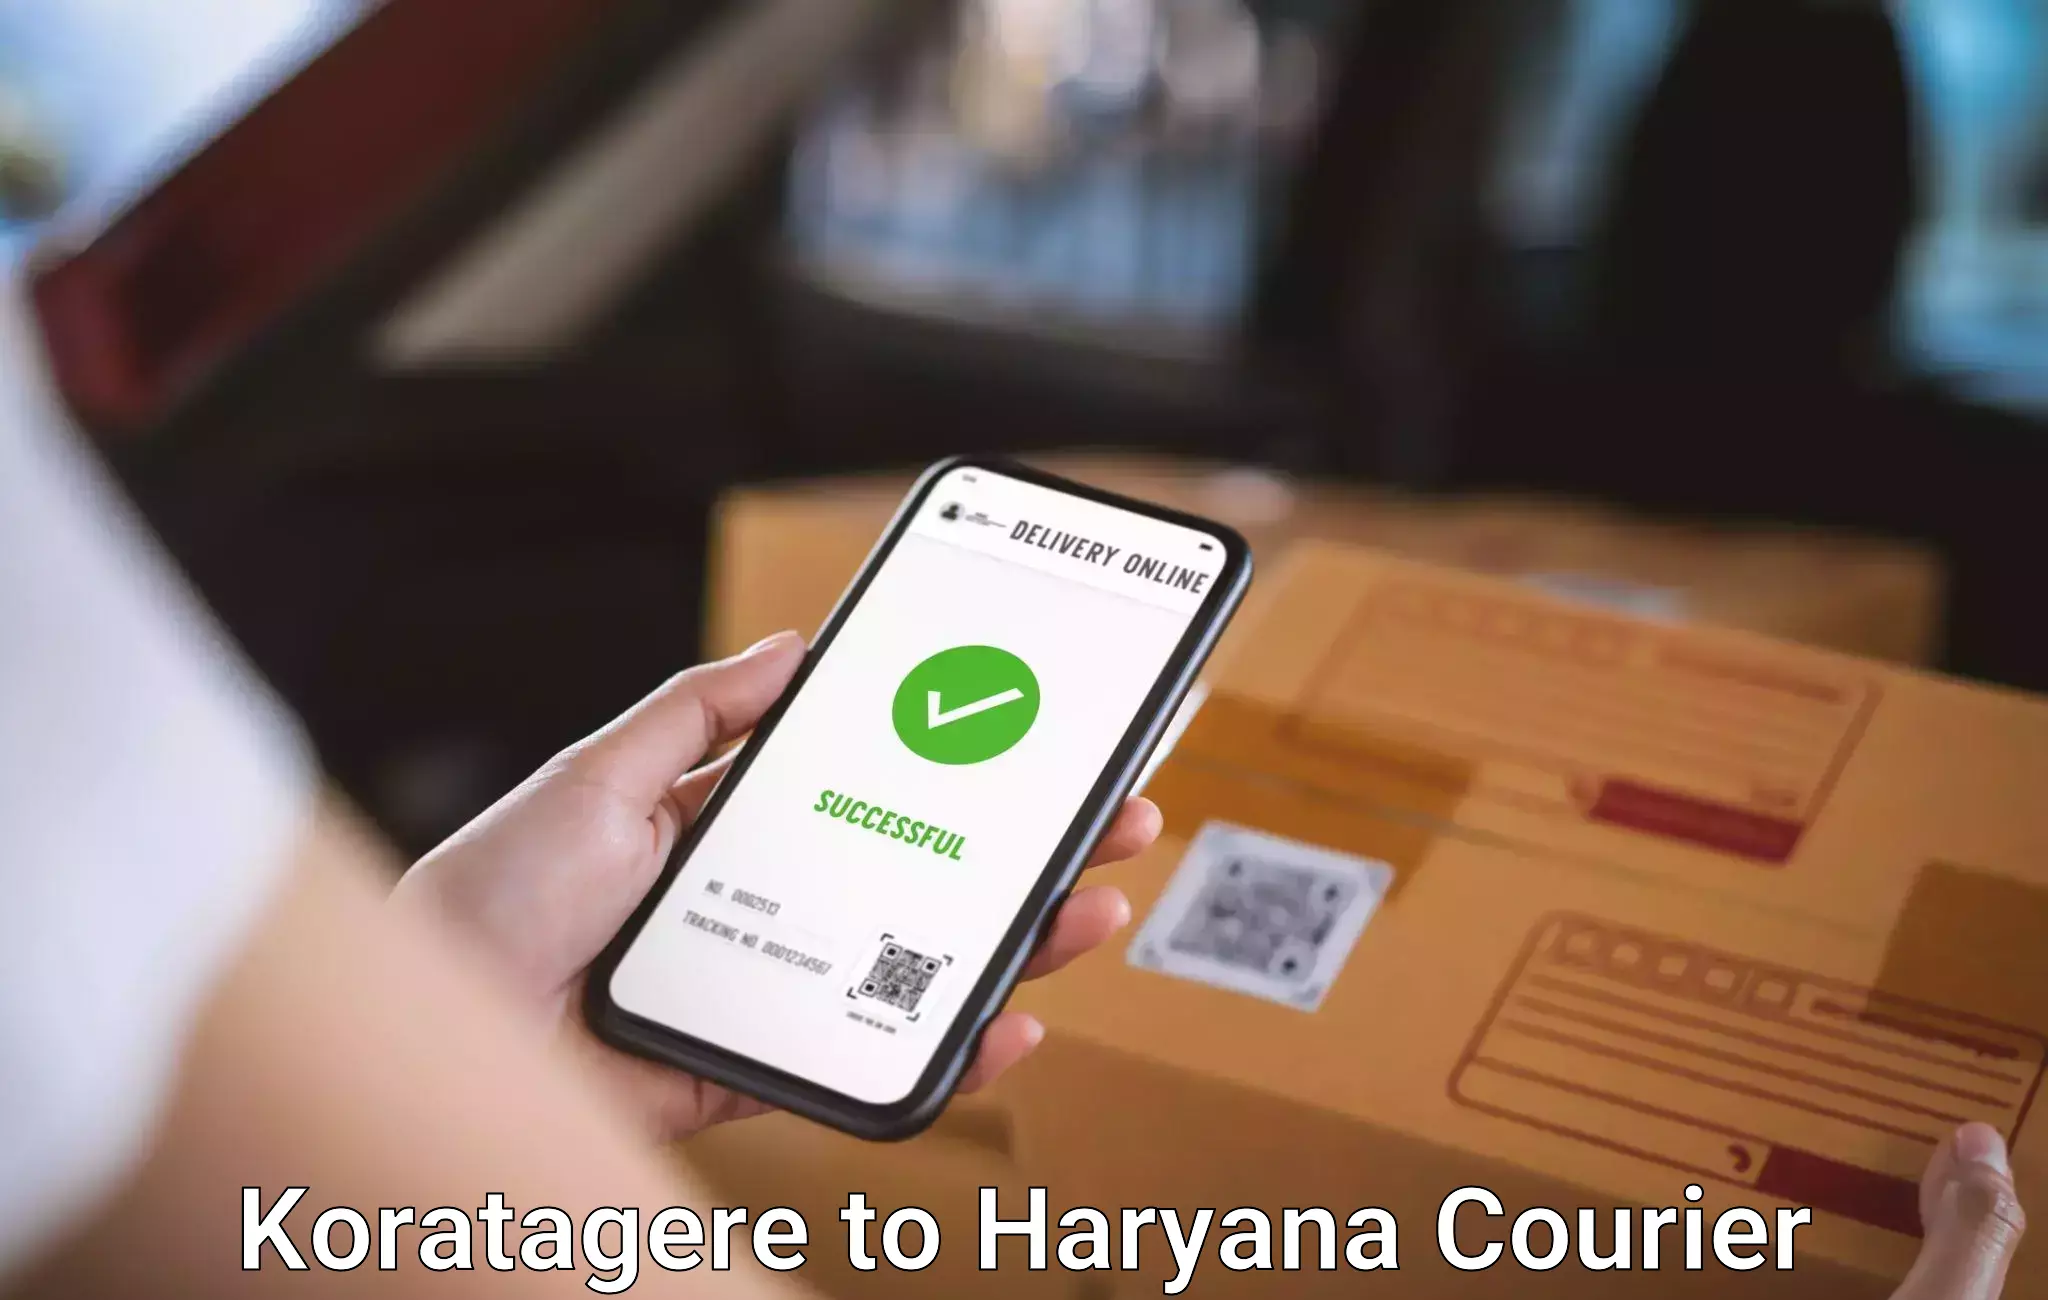 Reliable baggage delivery Koratagere to NCR Haryana